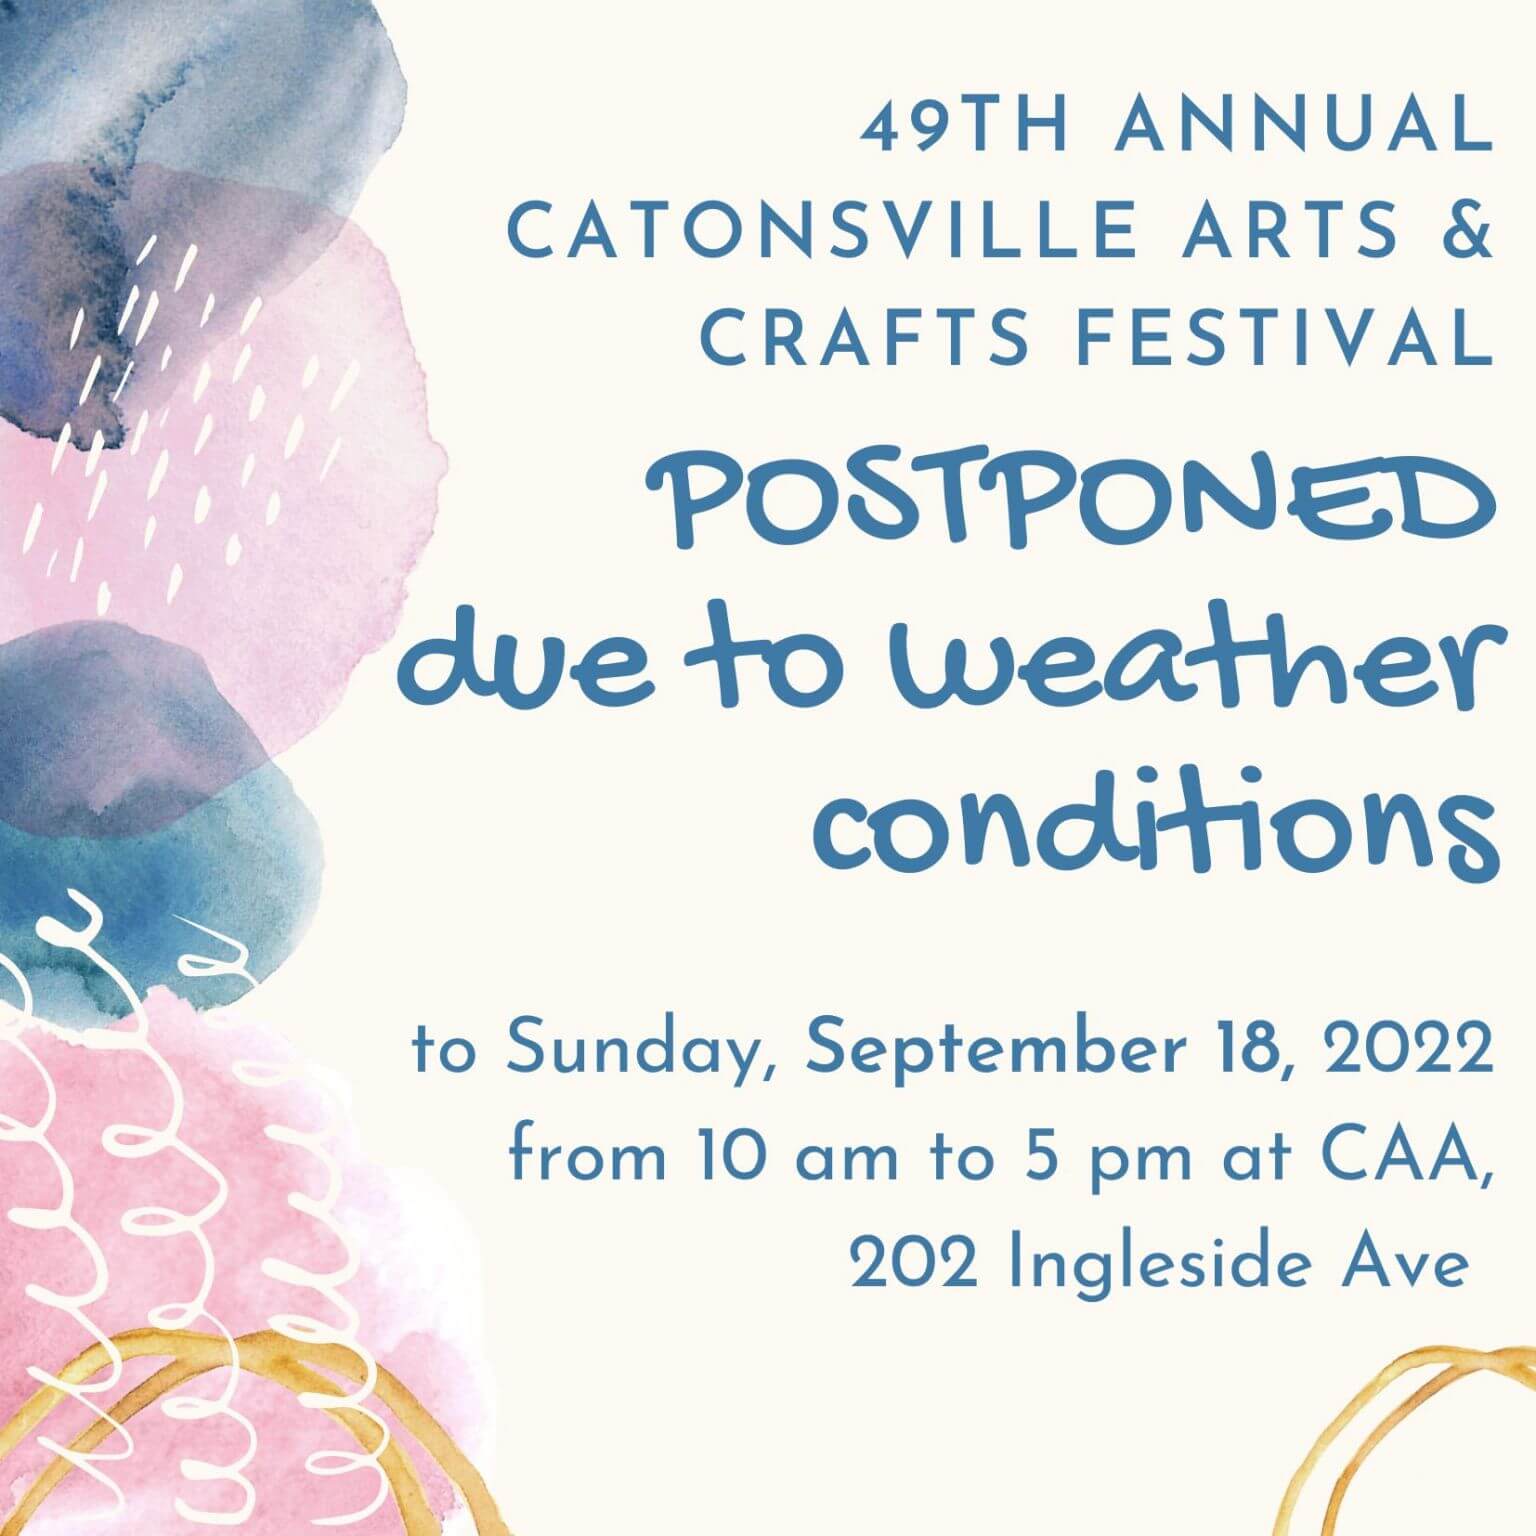 Arts & Crafts Festival Greater Catonsville Chamber of Commerce